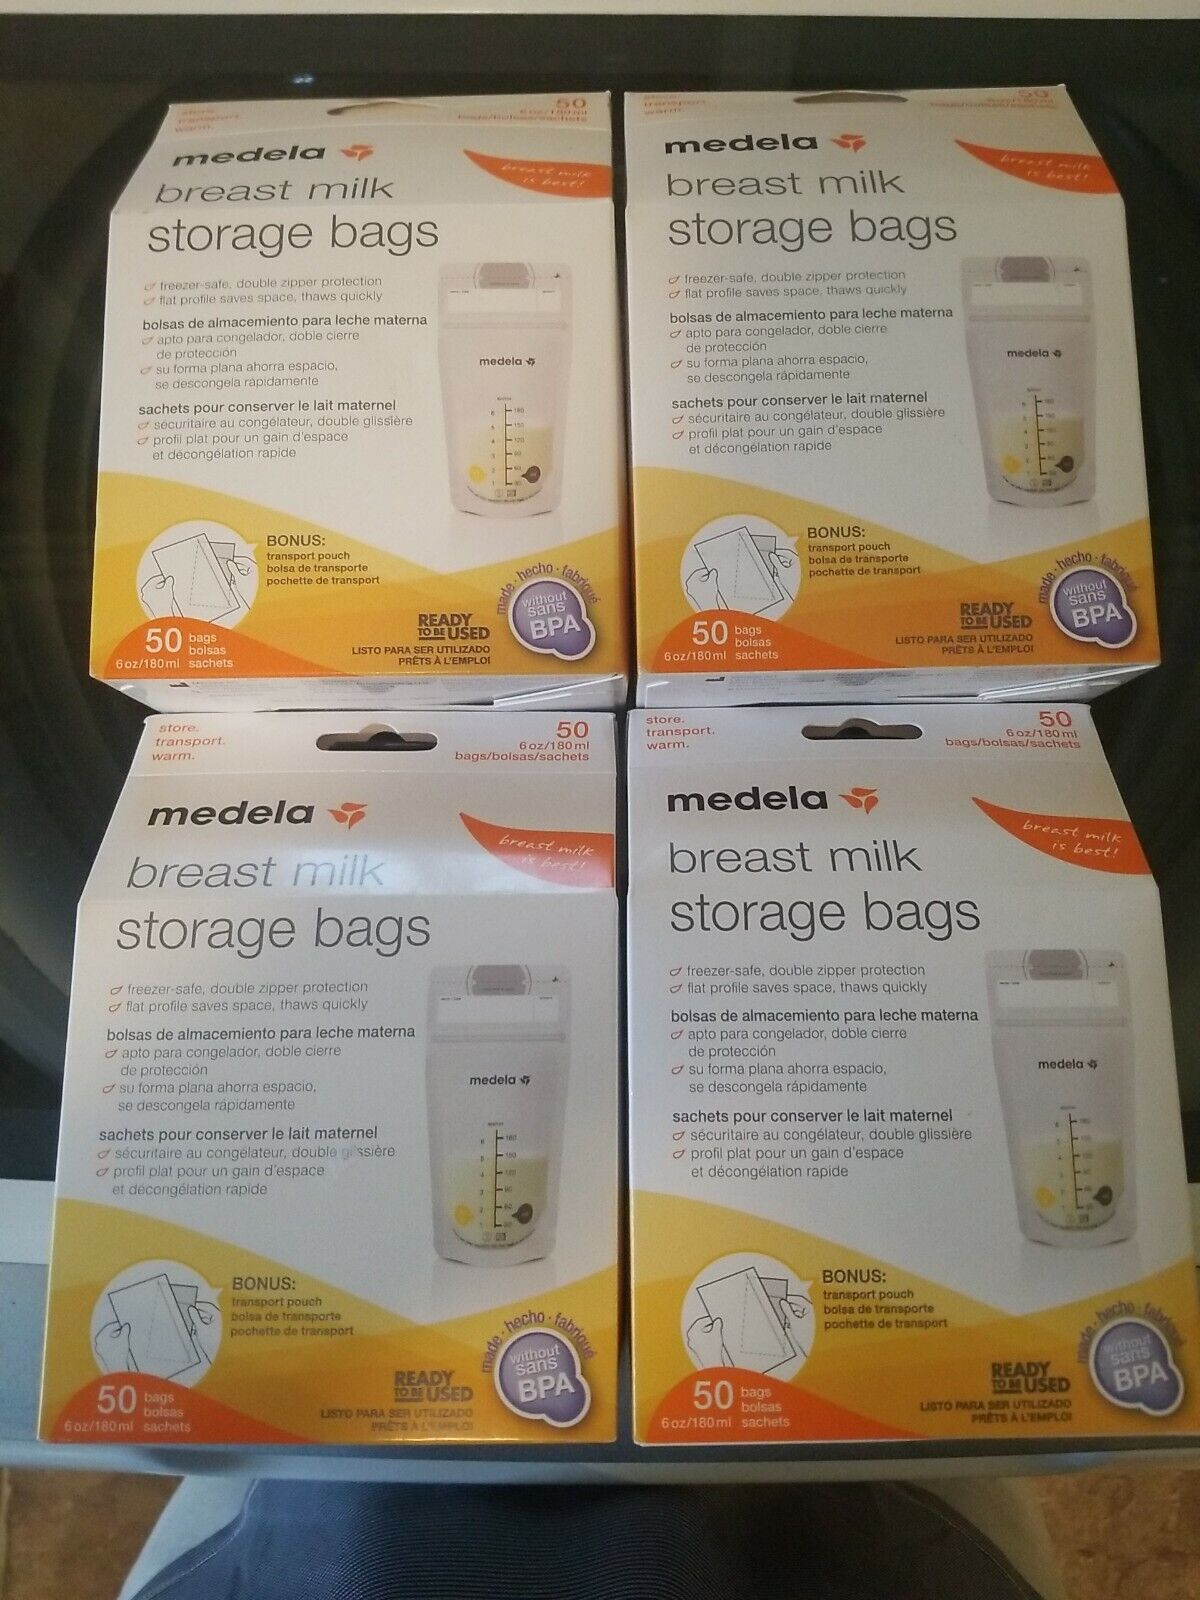 New 4 Boxes Medela Breast Milk Storage Bags 50 Count 6oz-200 Bags Total Lot Of 4